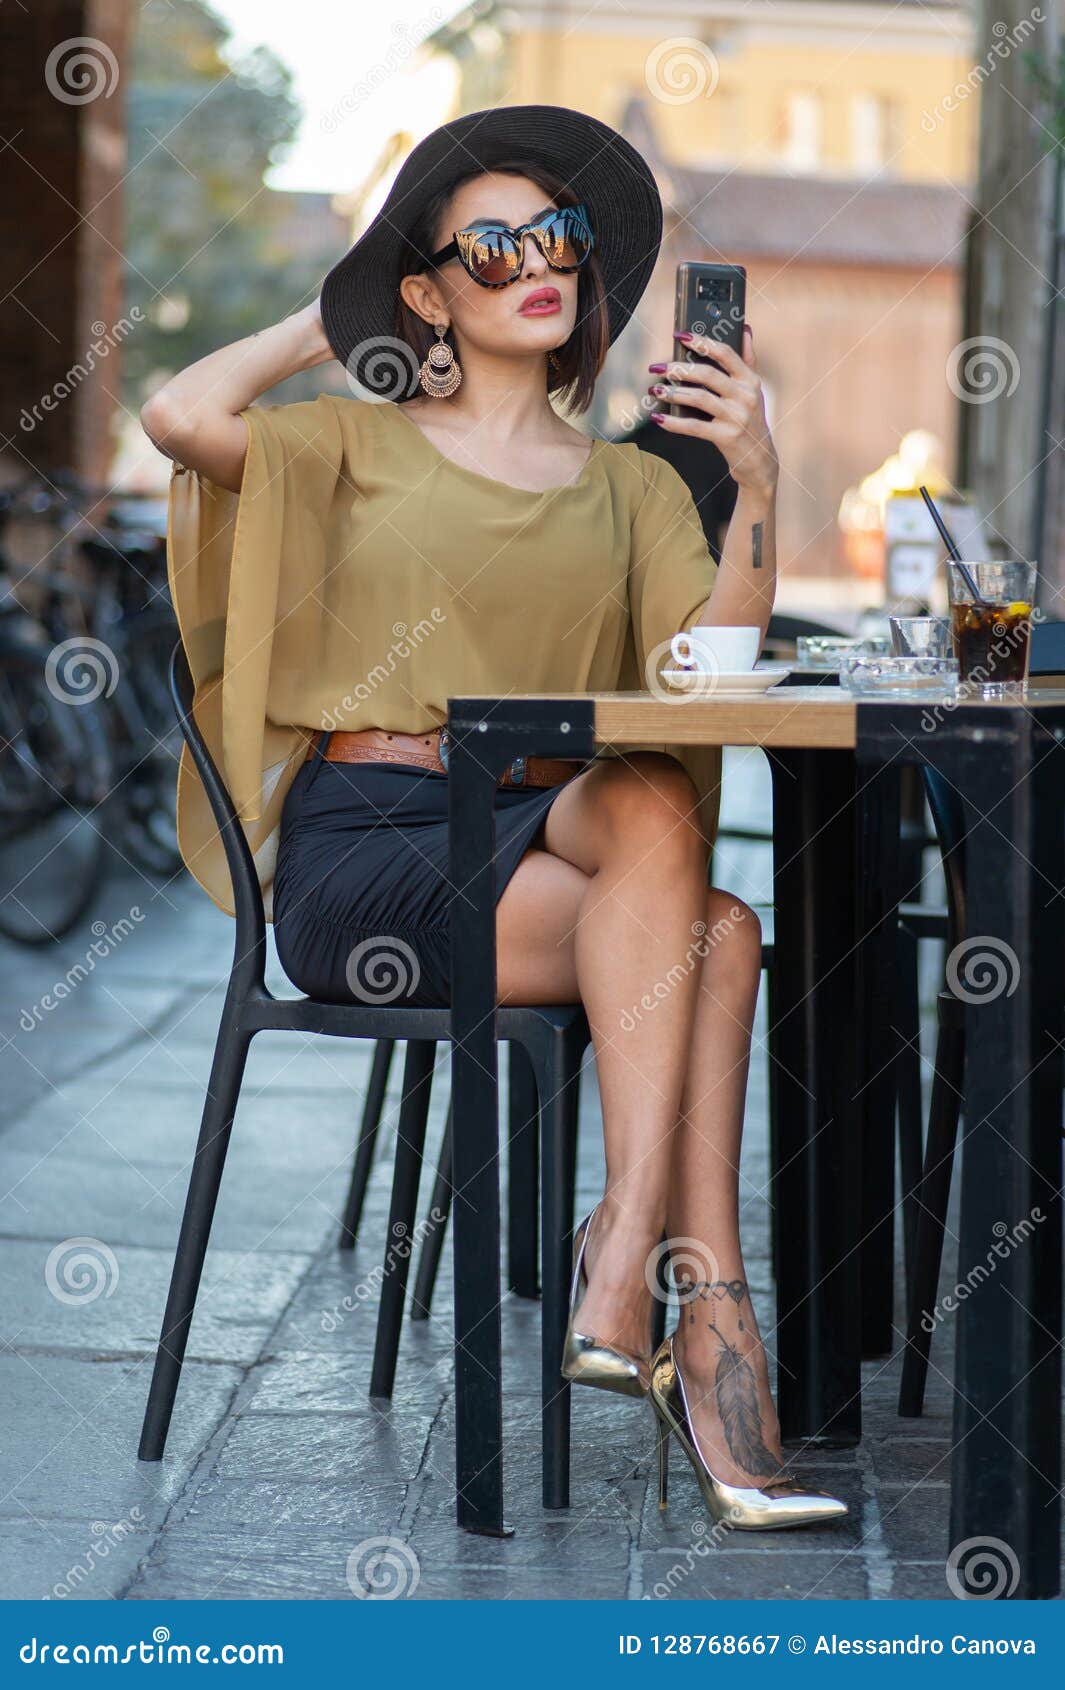 Elegant Italian Woman With Hat And Glasses Checks Her Makeup On Her